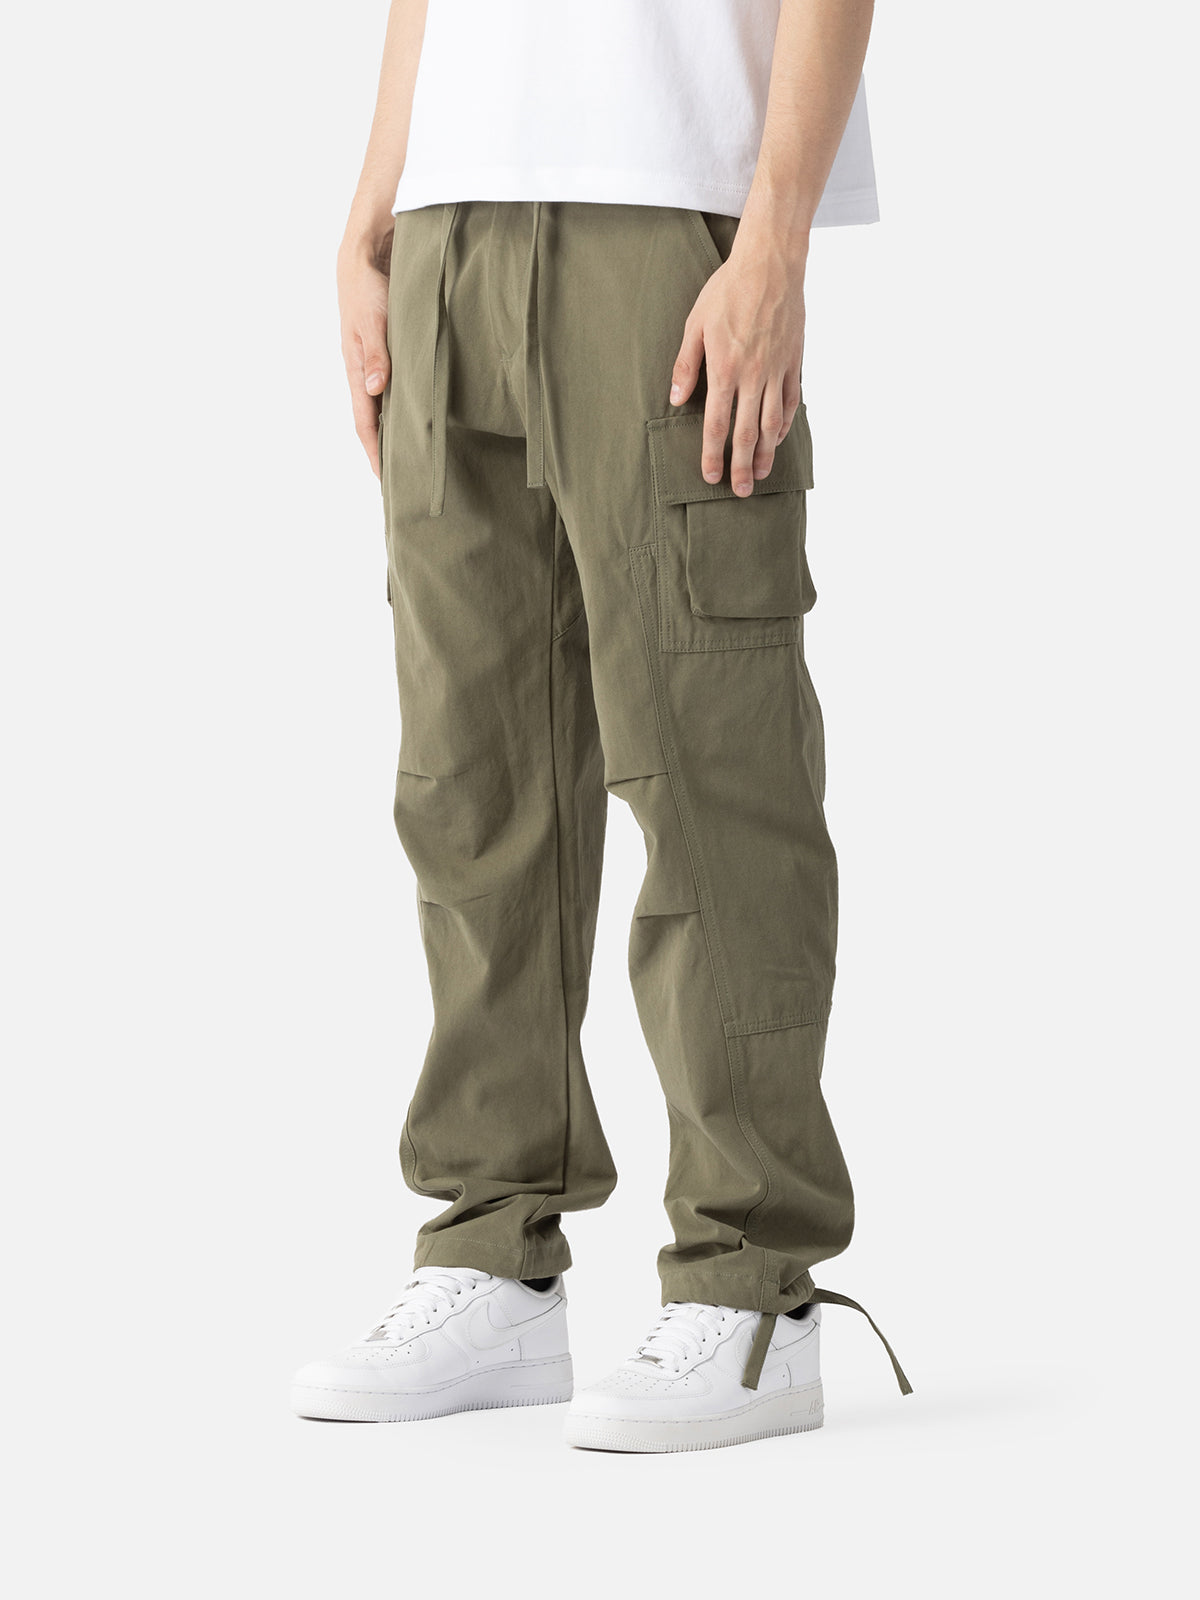 Carhartt WIP Cargo Pants for Fall 2019